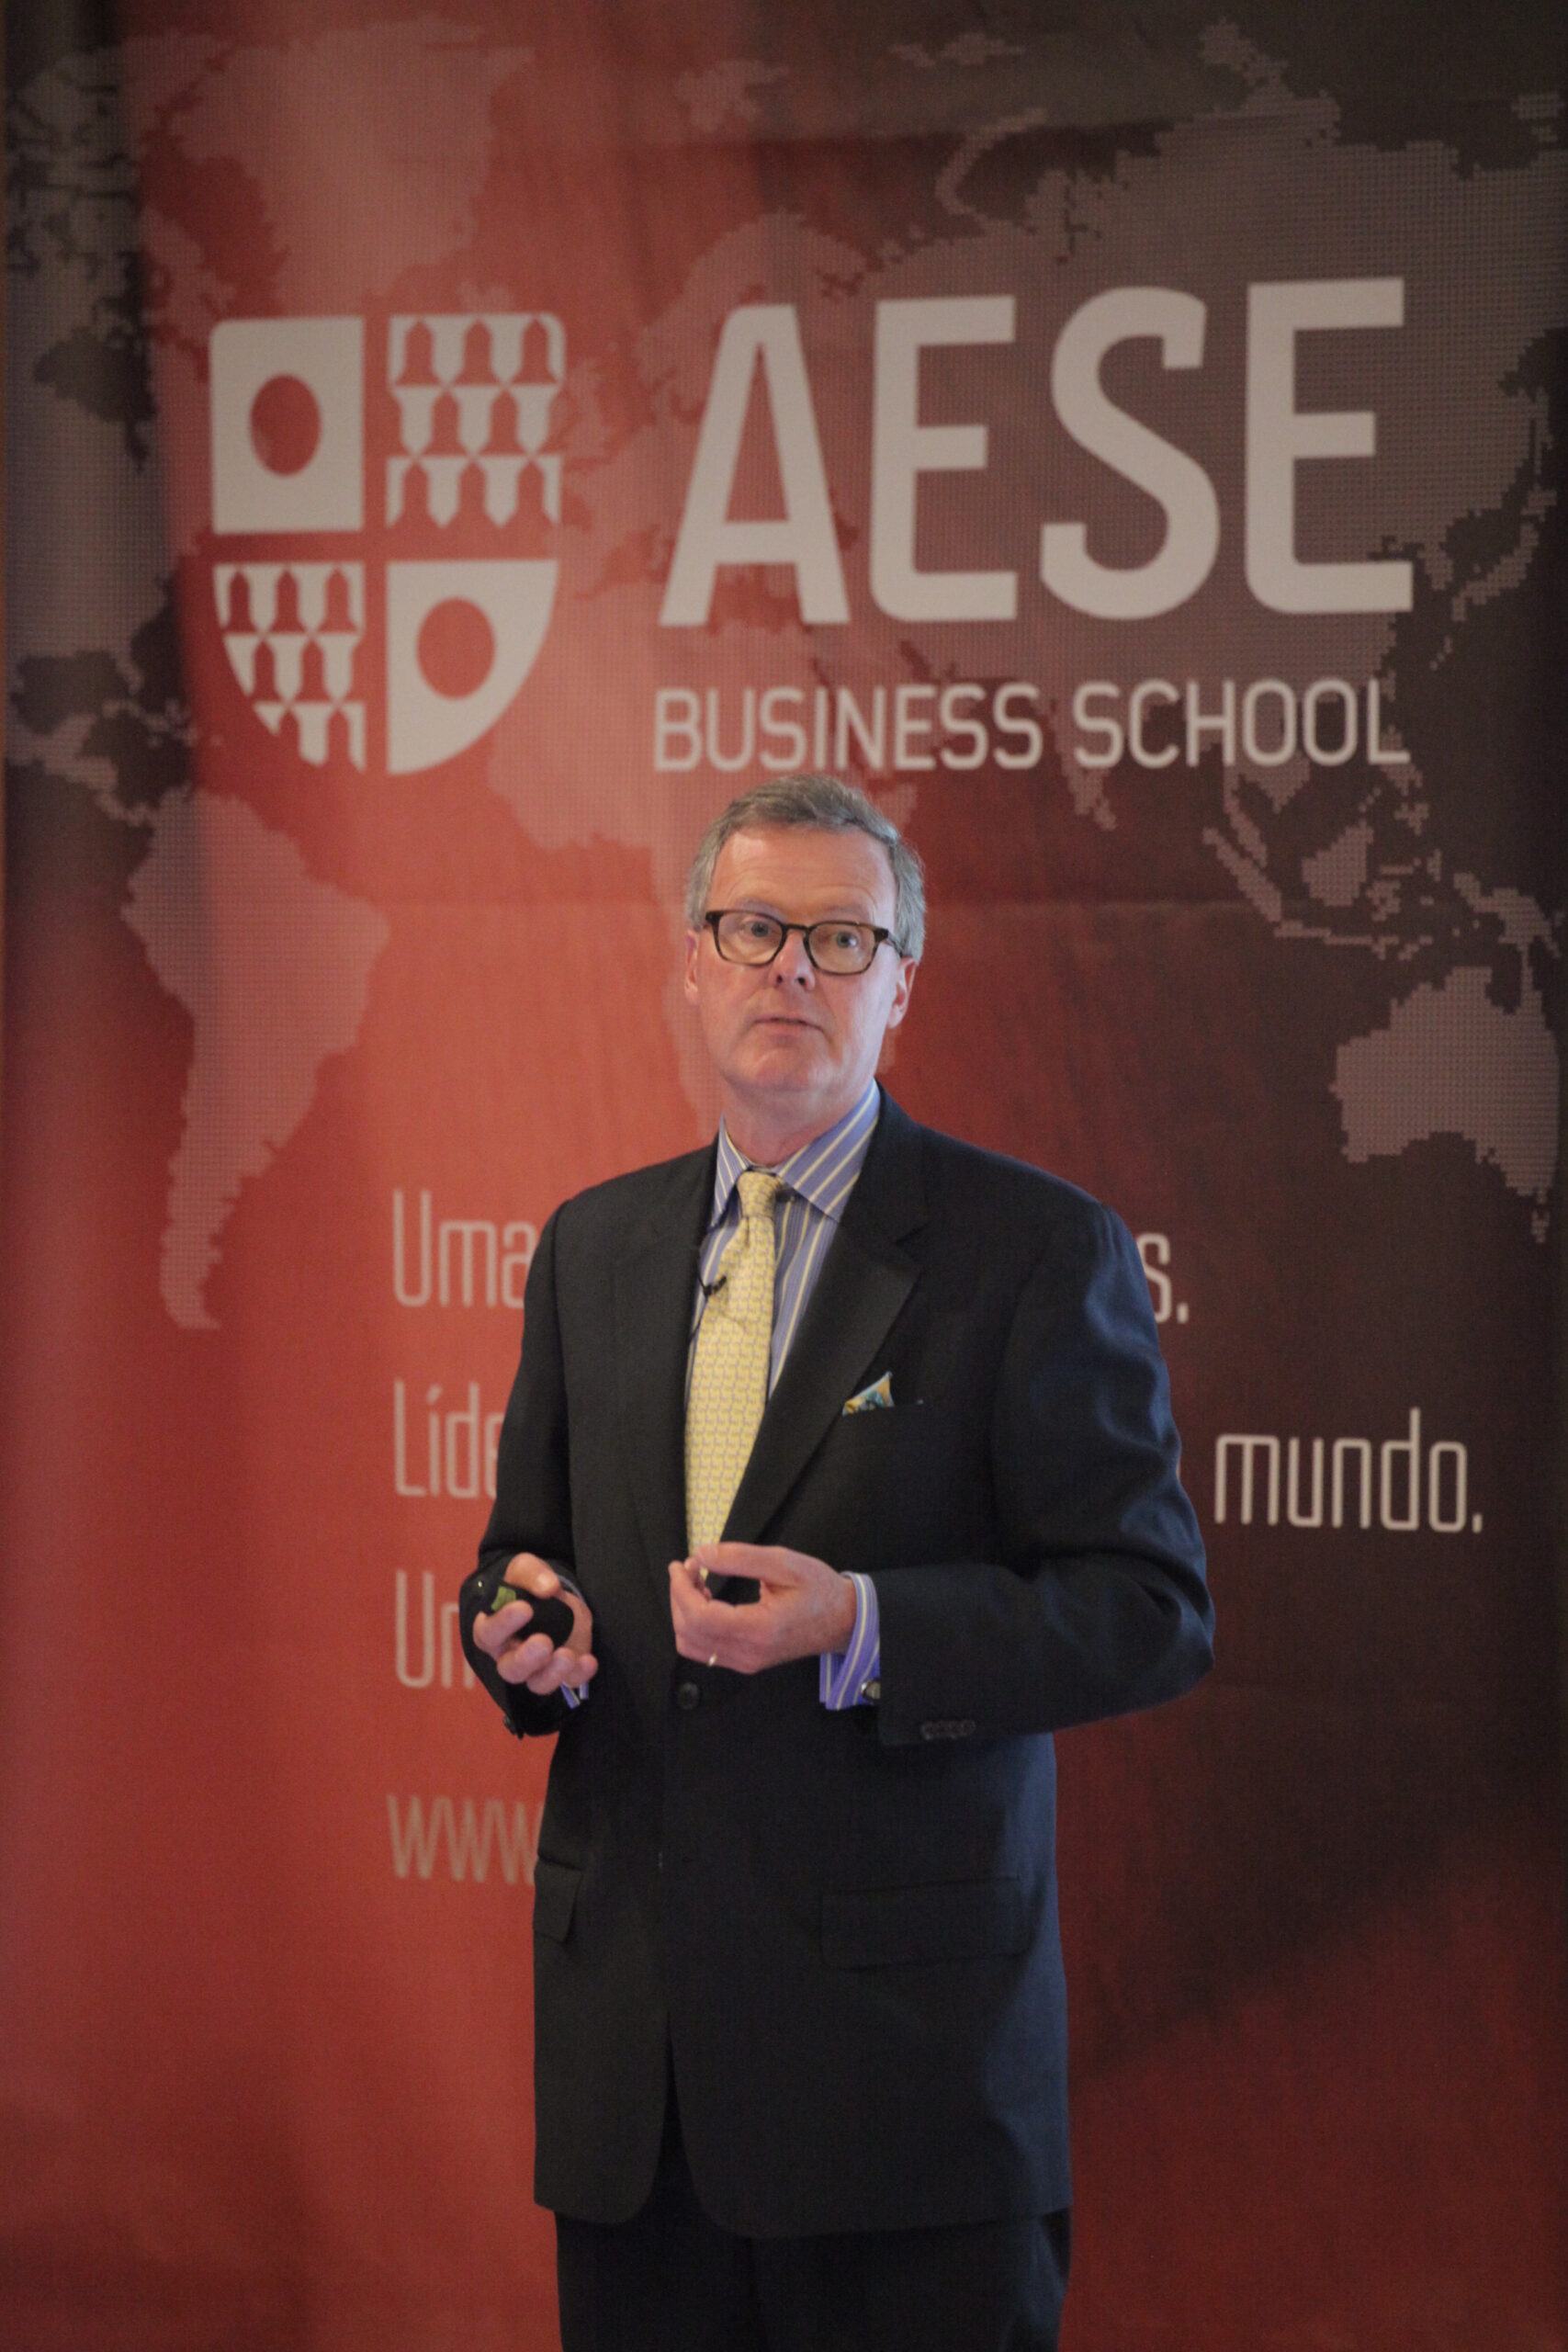 Eric McNulty presenting at the AESE Business School in Lisbon